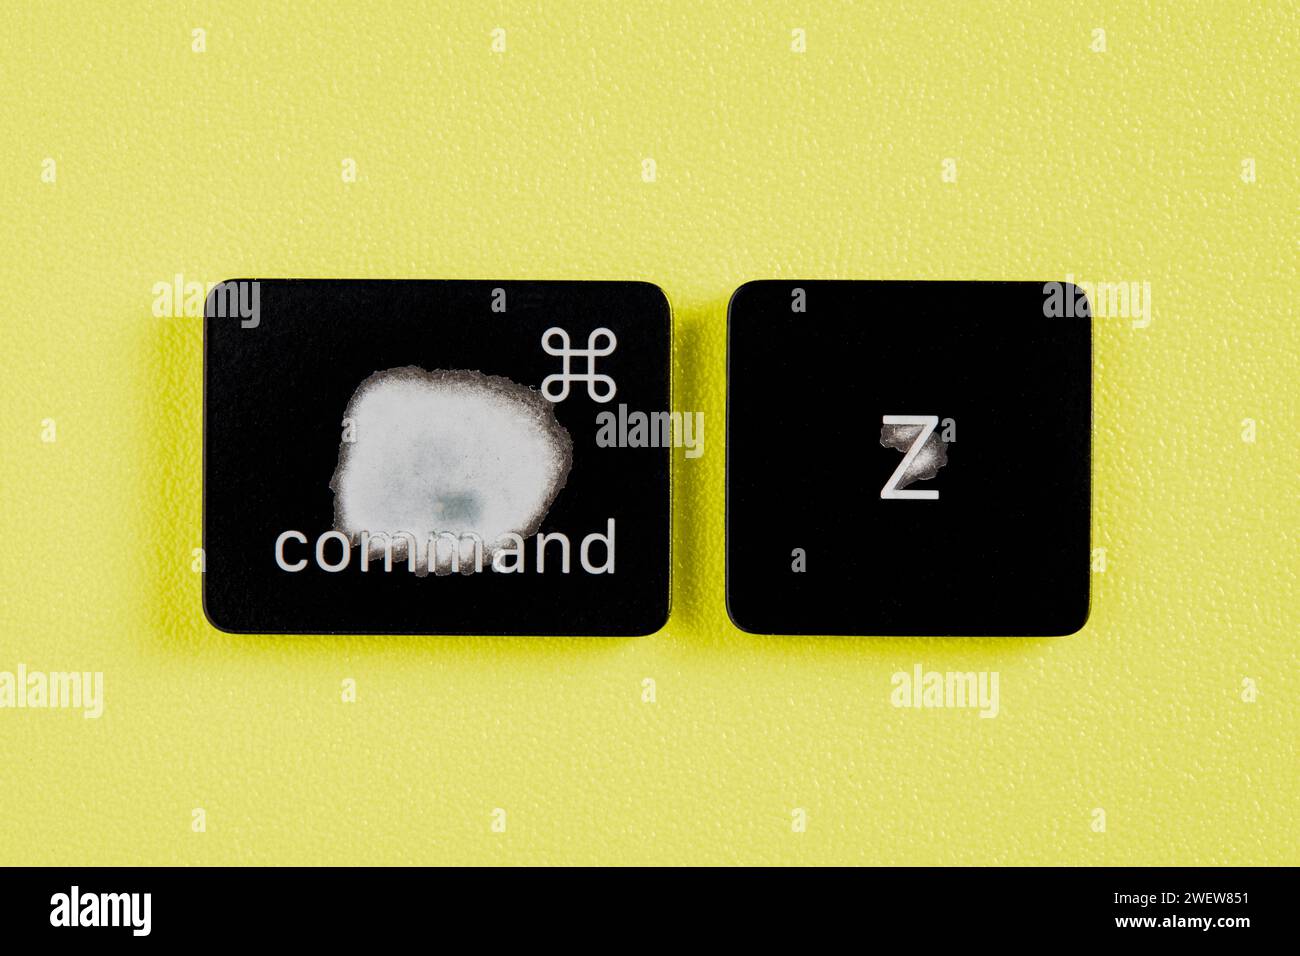 The command key and Z key are worn out due to frequent use and are removed from a keyboard with yellow background Stock Photo